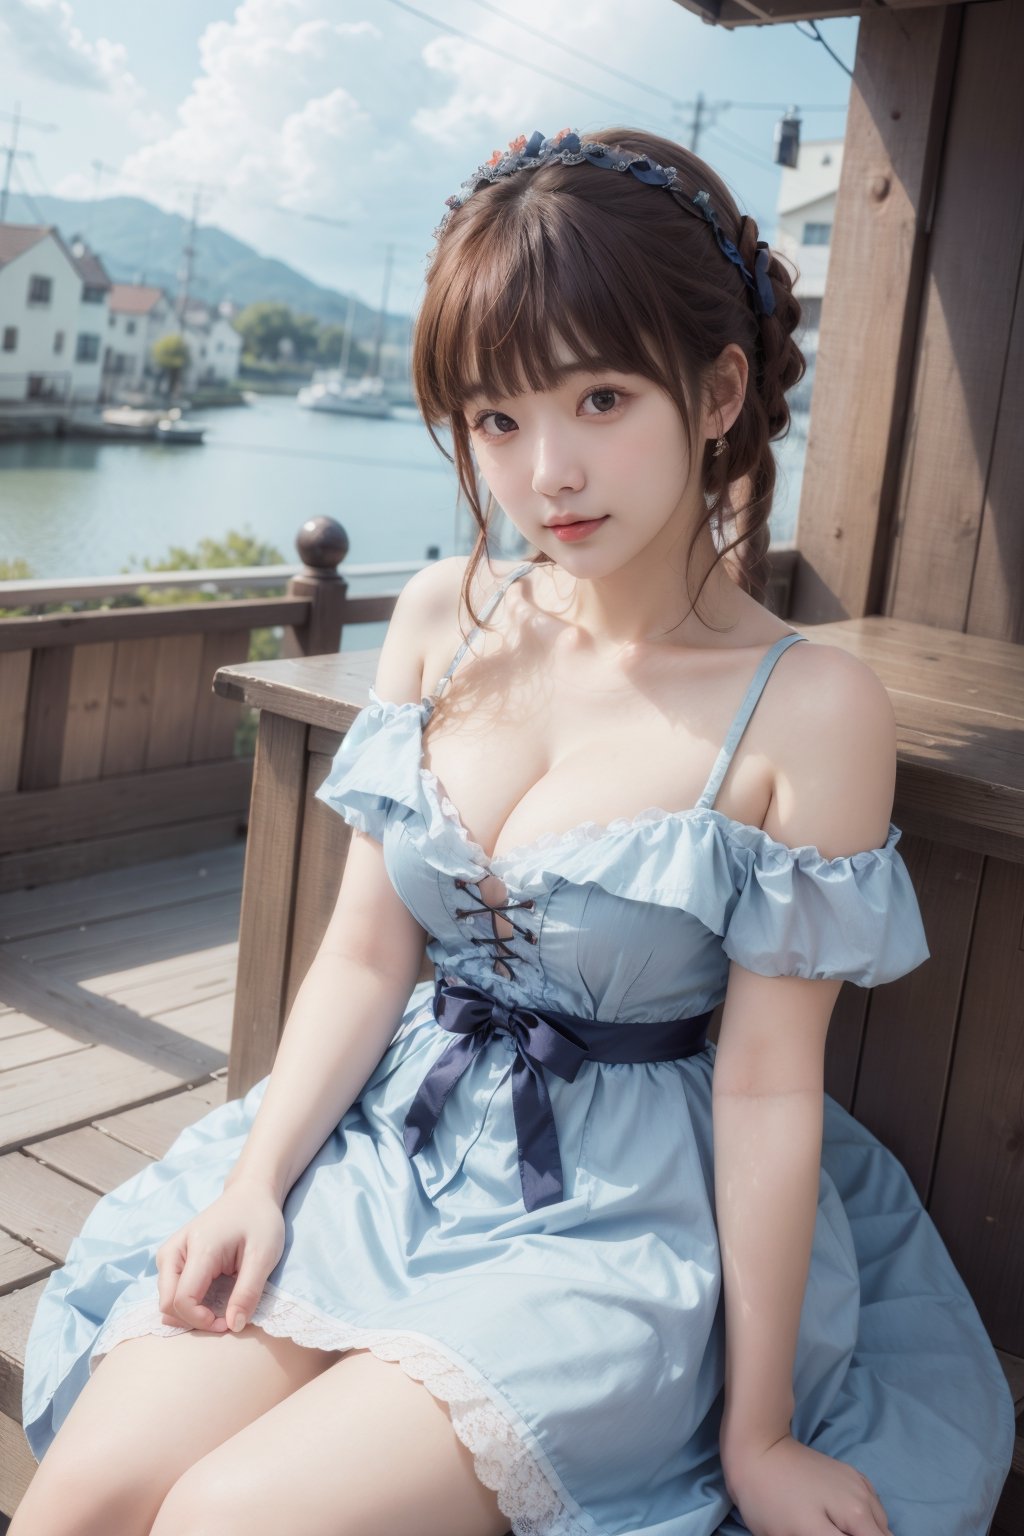 Best quality, masterpiece, film grain, close-up portrait, raw photo of 20 years old woman in off-shoulder lolita fashion lase trim dress, sitting in front of tavern, waist up, shy face, high angle/from above, cleavage, cloudy sky, high key light, hard shadow, dark theme